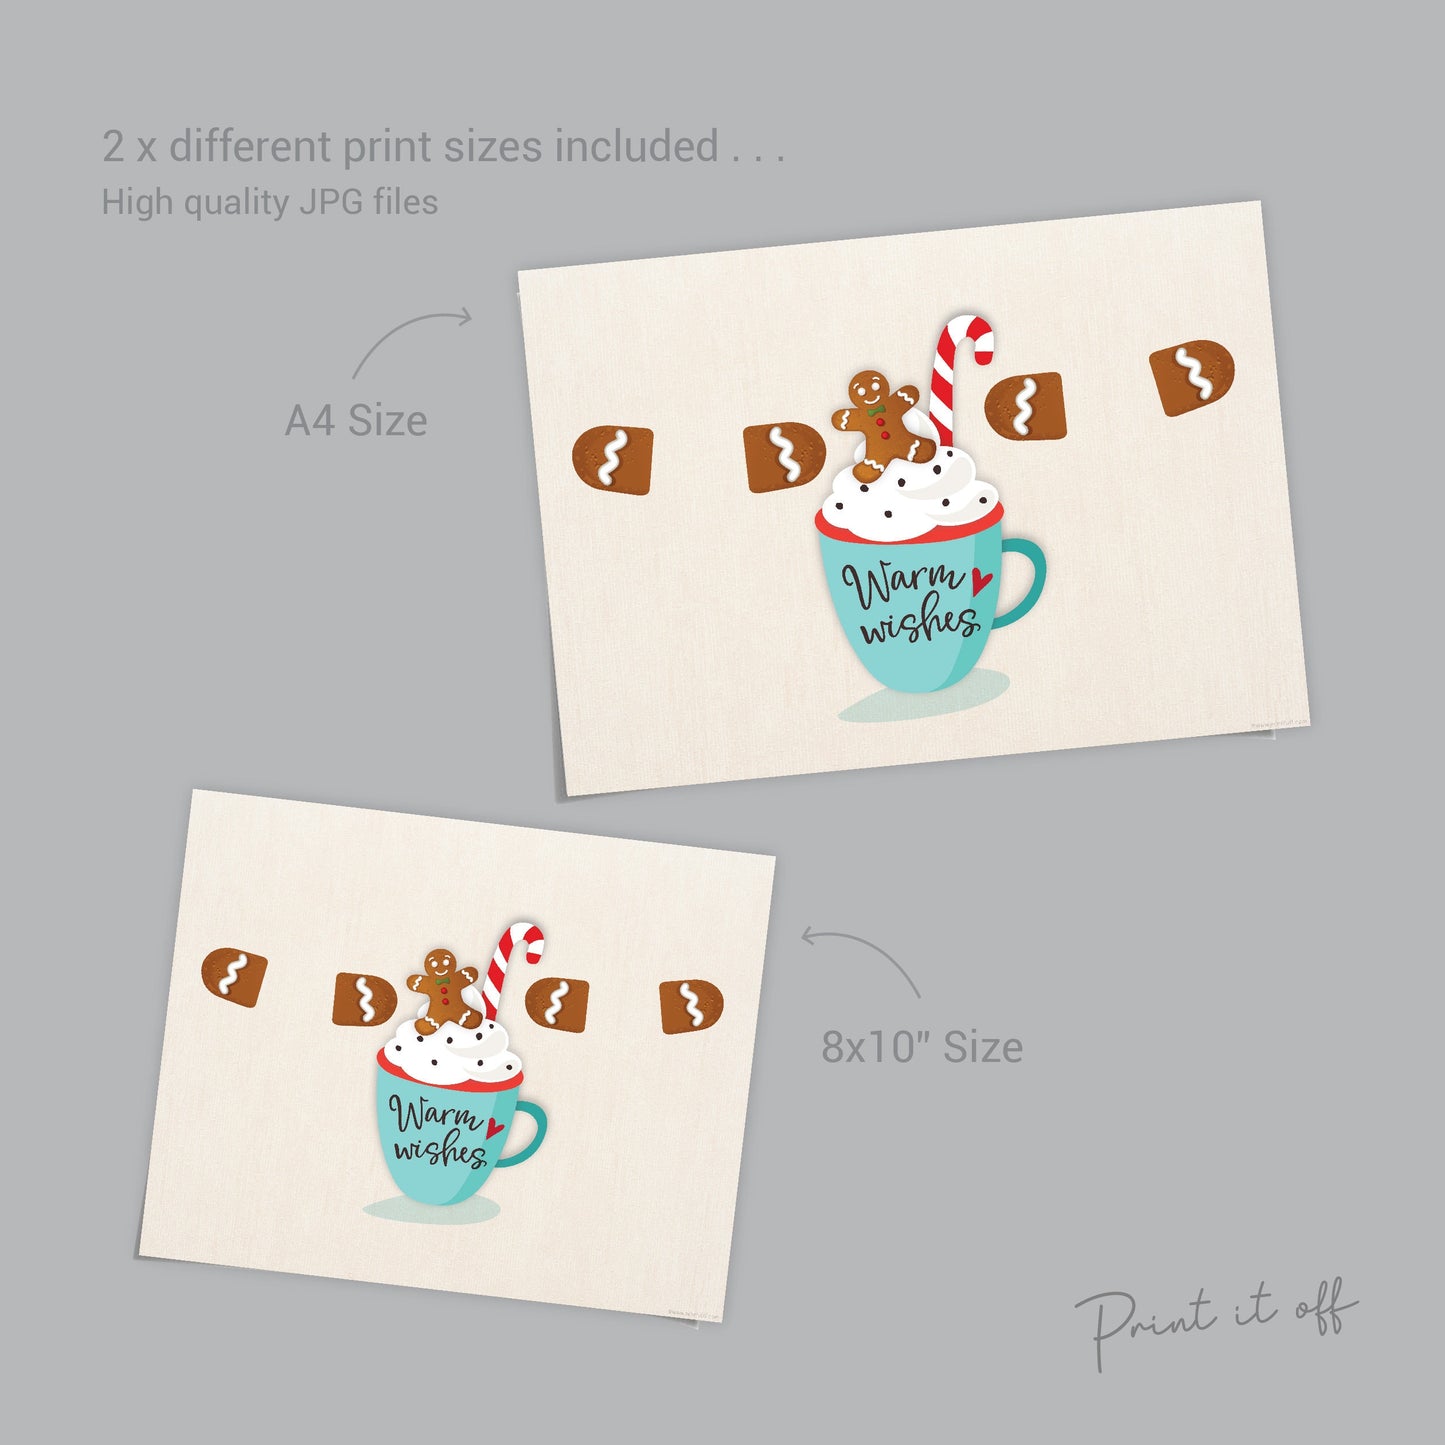 Warm Wishes Gingerbread Footprint Art Craft / First Christmas Xmas Baby Kids DIY Foot Card Sign Gift / Print It Off 0665